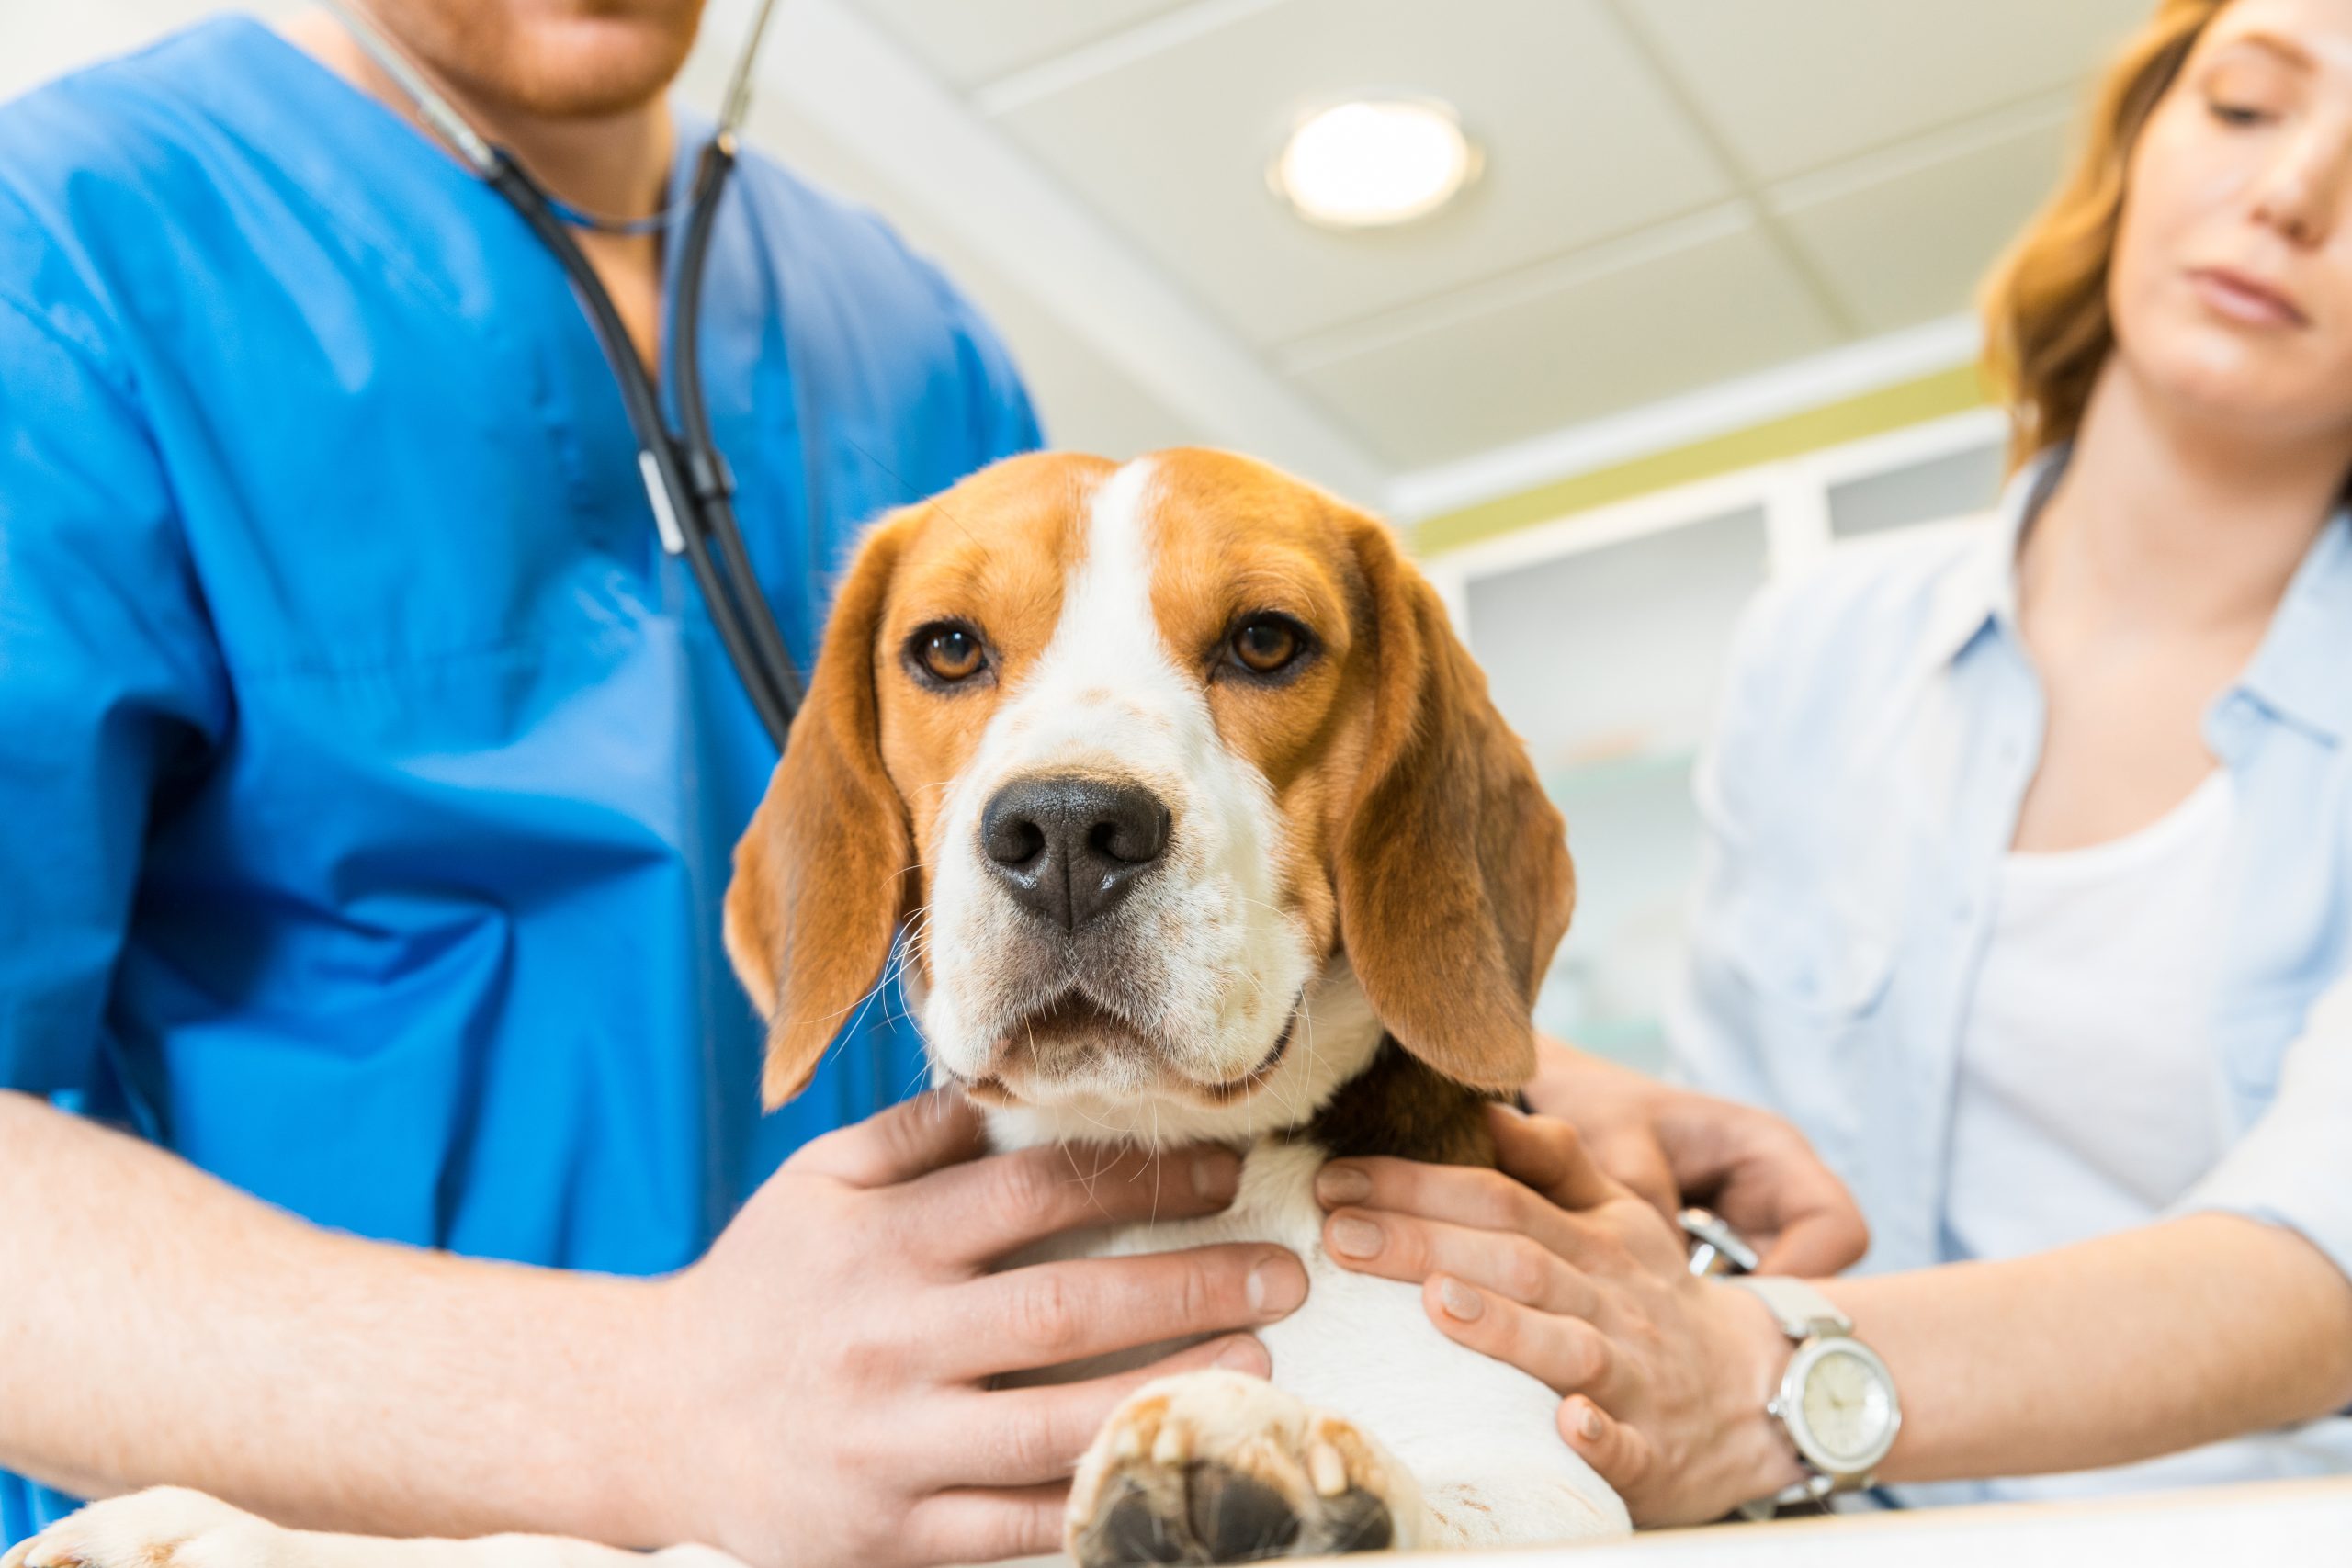 Maryland Scientist Investigates Mysterious Canine Illness